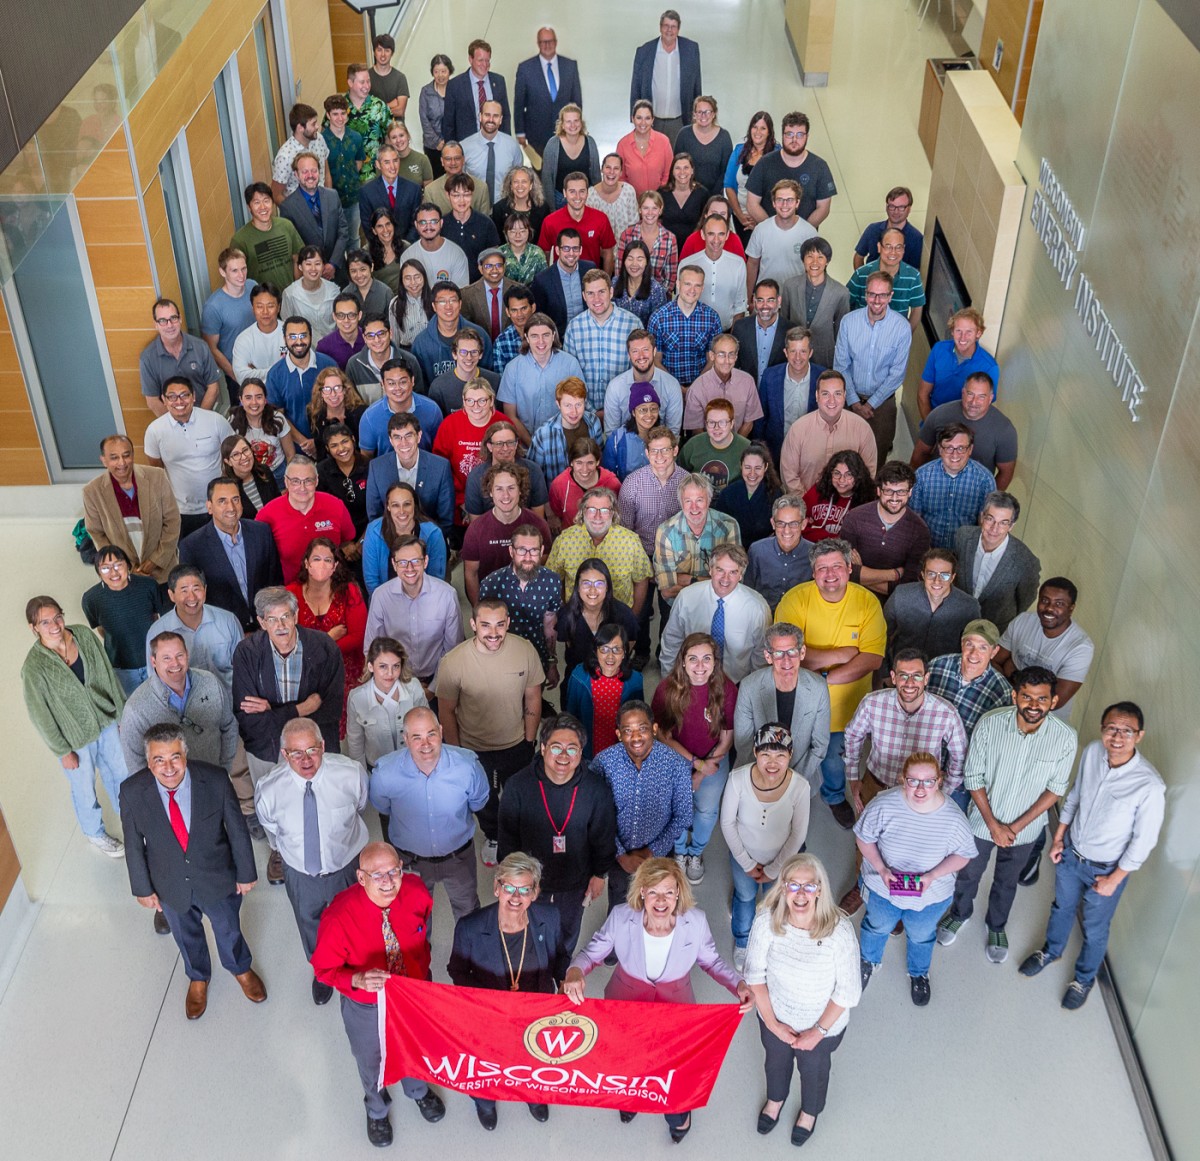 Group of researchers pose with Wisconsin flag